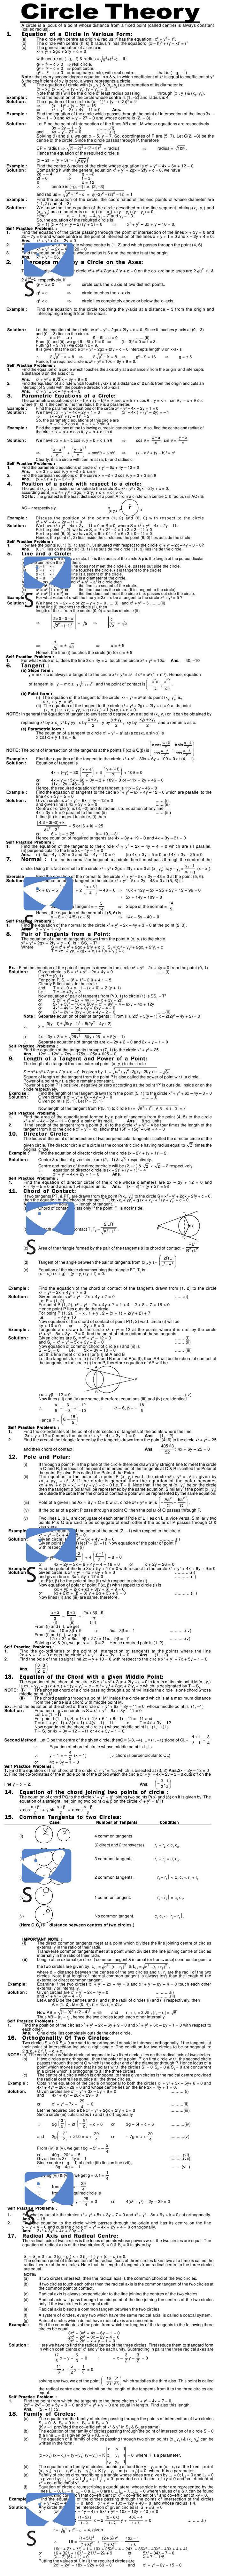 Maths Study Material - Chapter 18